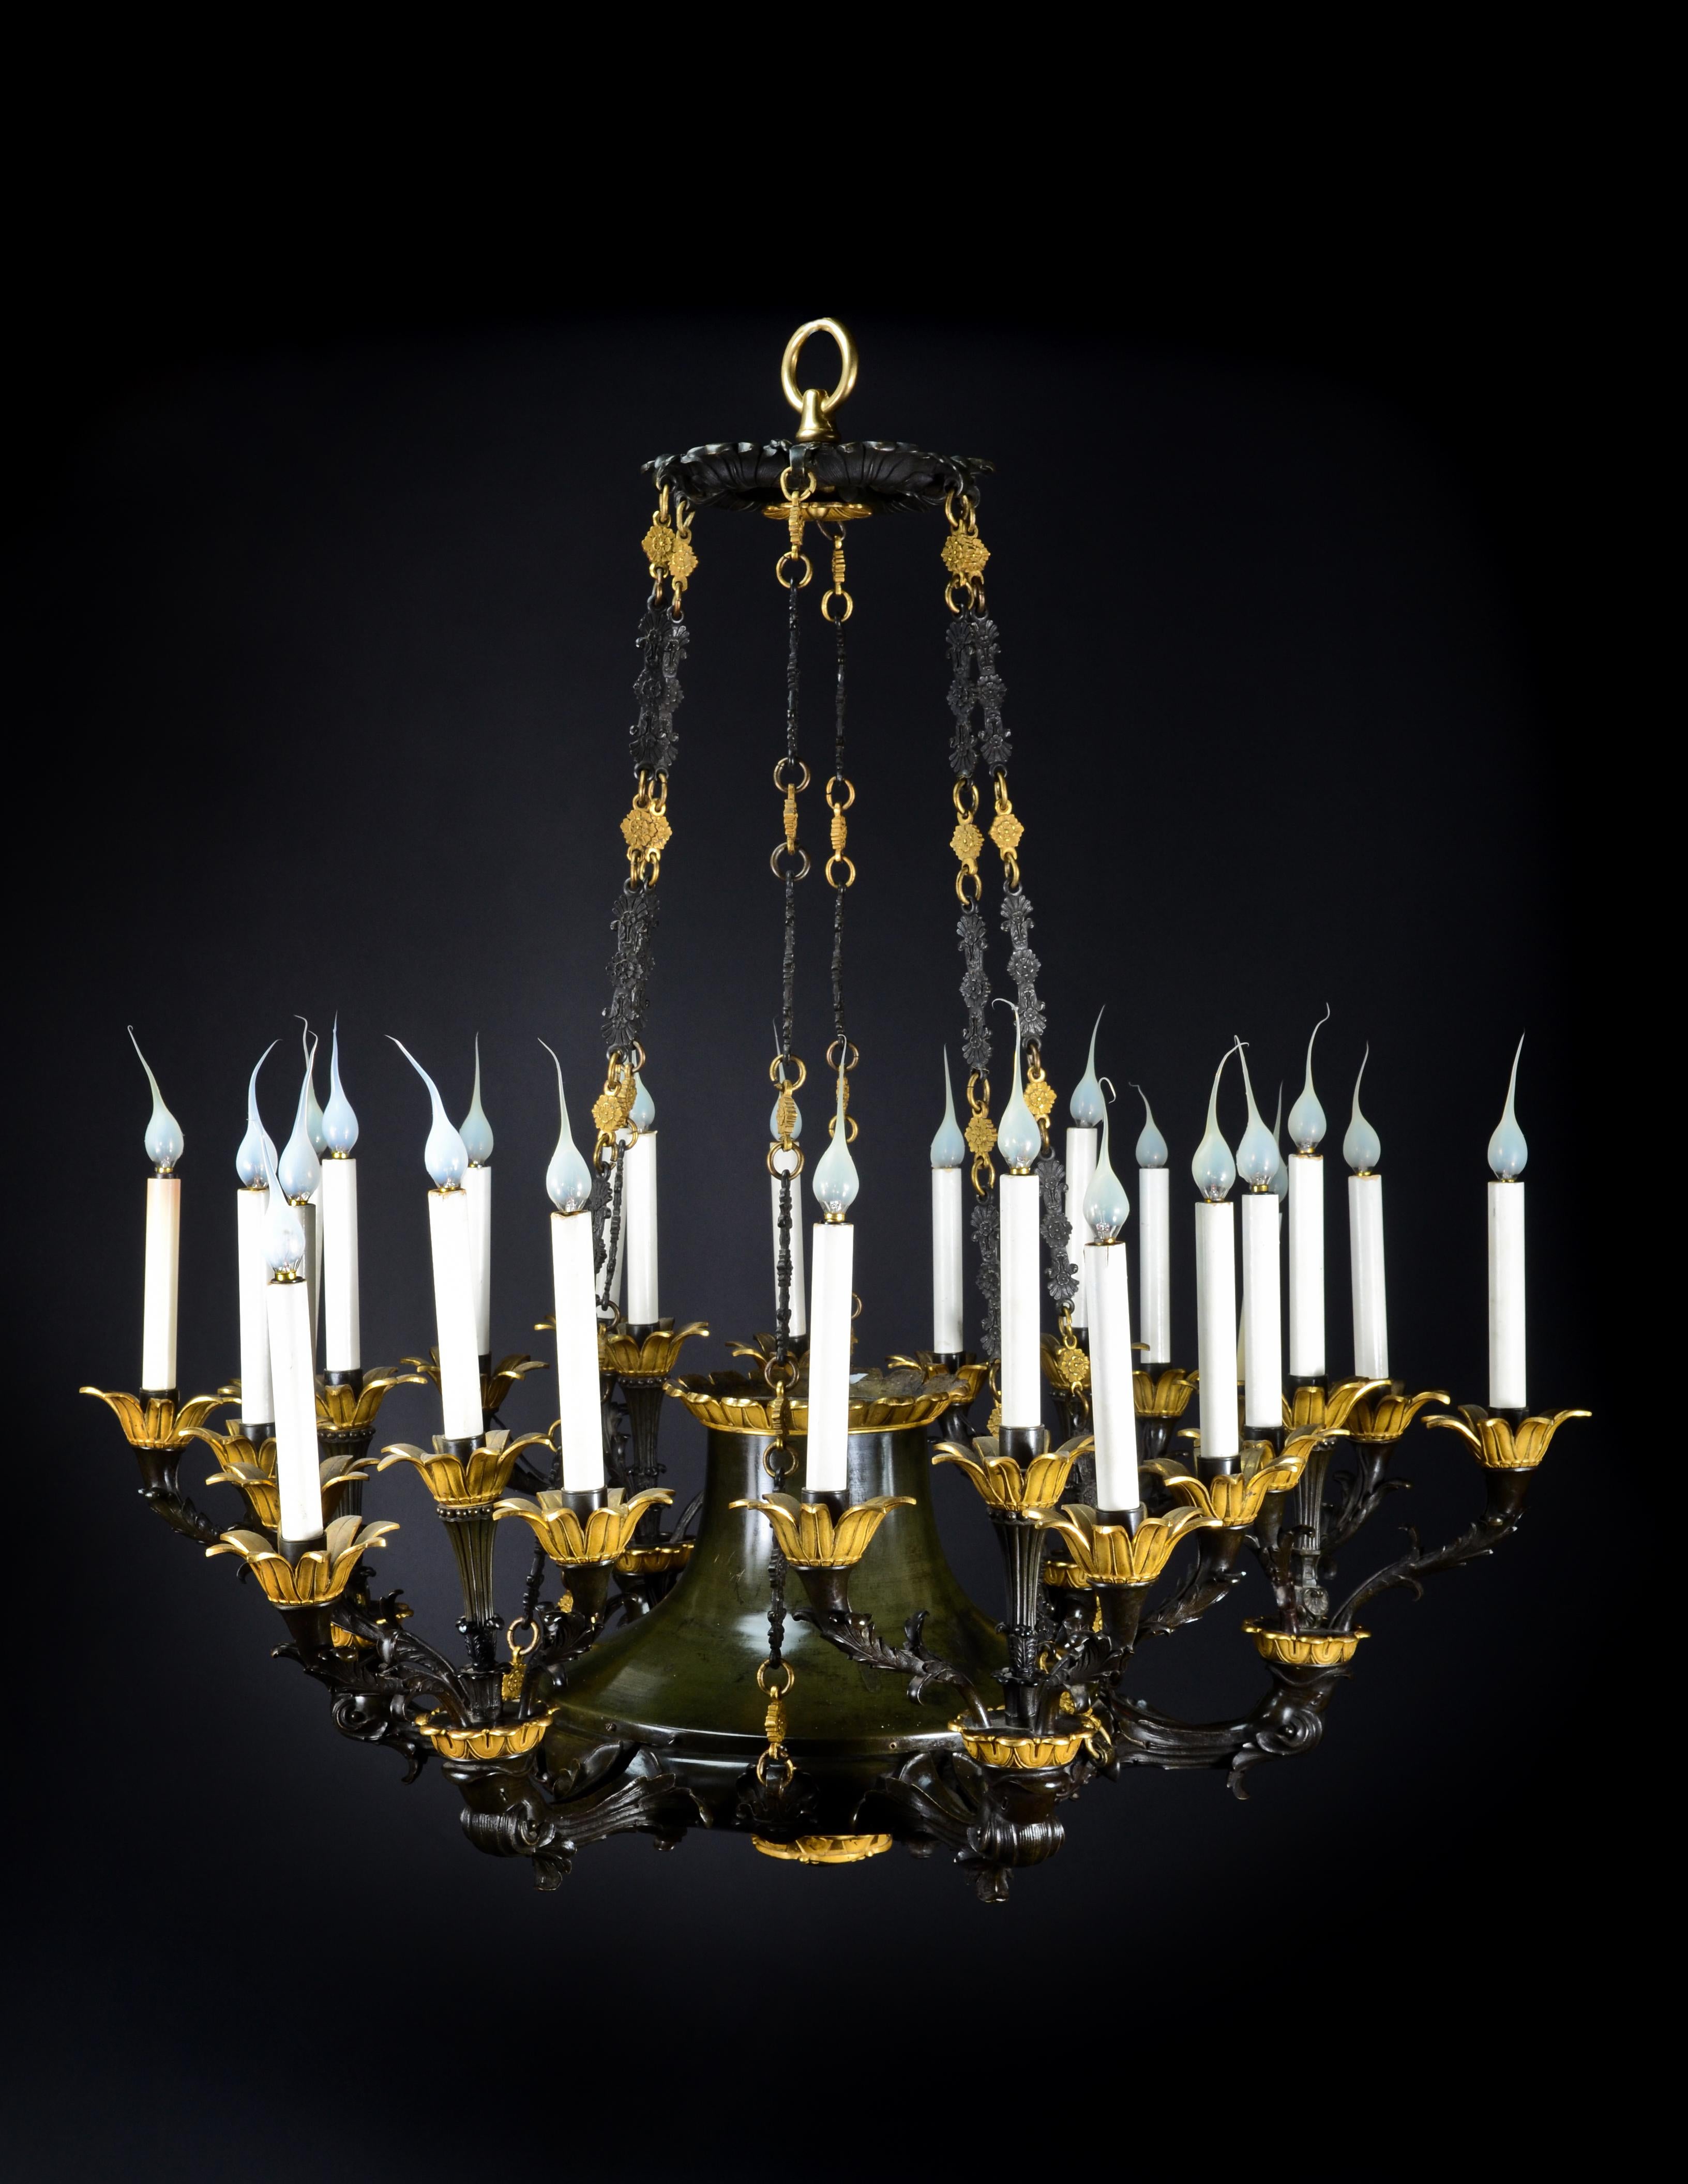 A Palatial and large antique French Empire gilt and patinated bronze multi light neoclassical chandelier of superb quality embellished with patinated bronze arms which are adorned with dolphins.